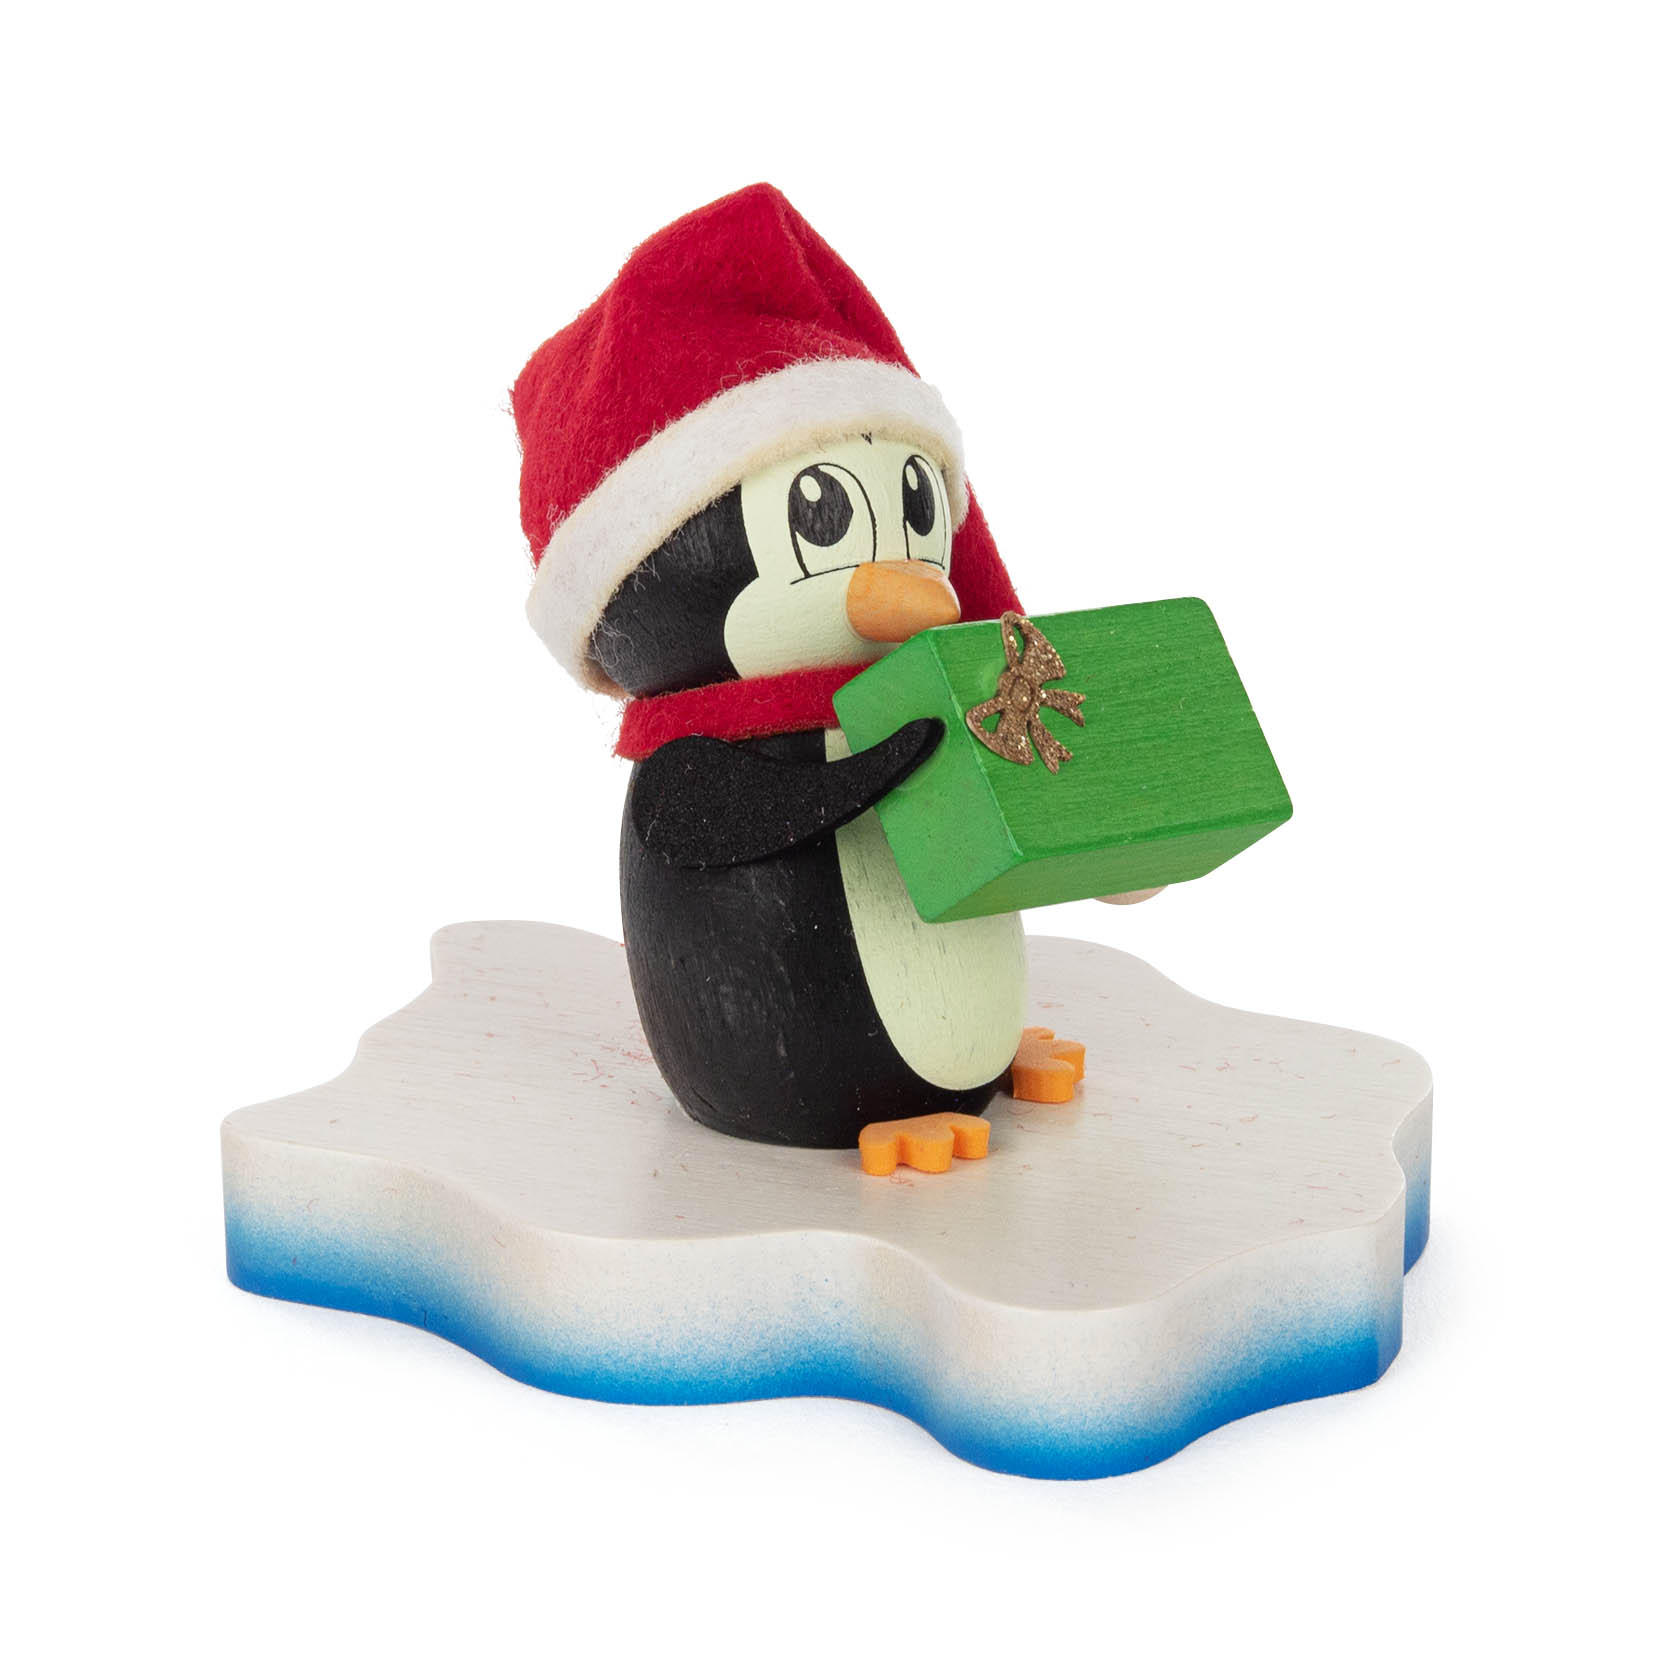 Pinguin "For you"